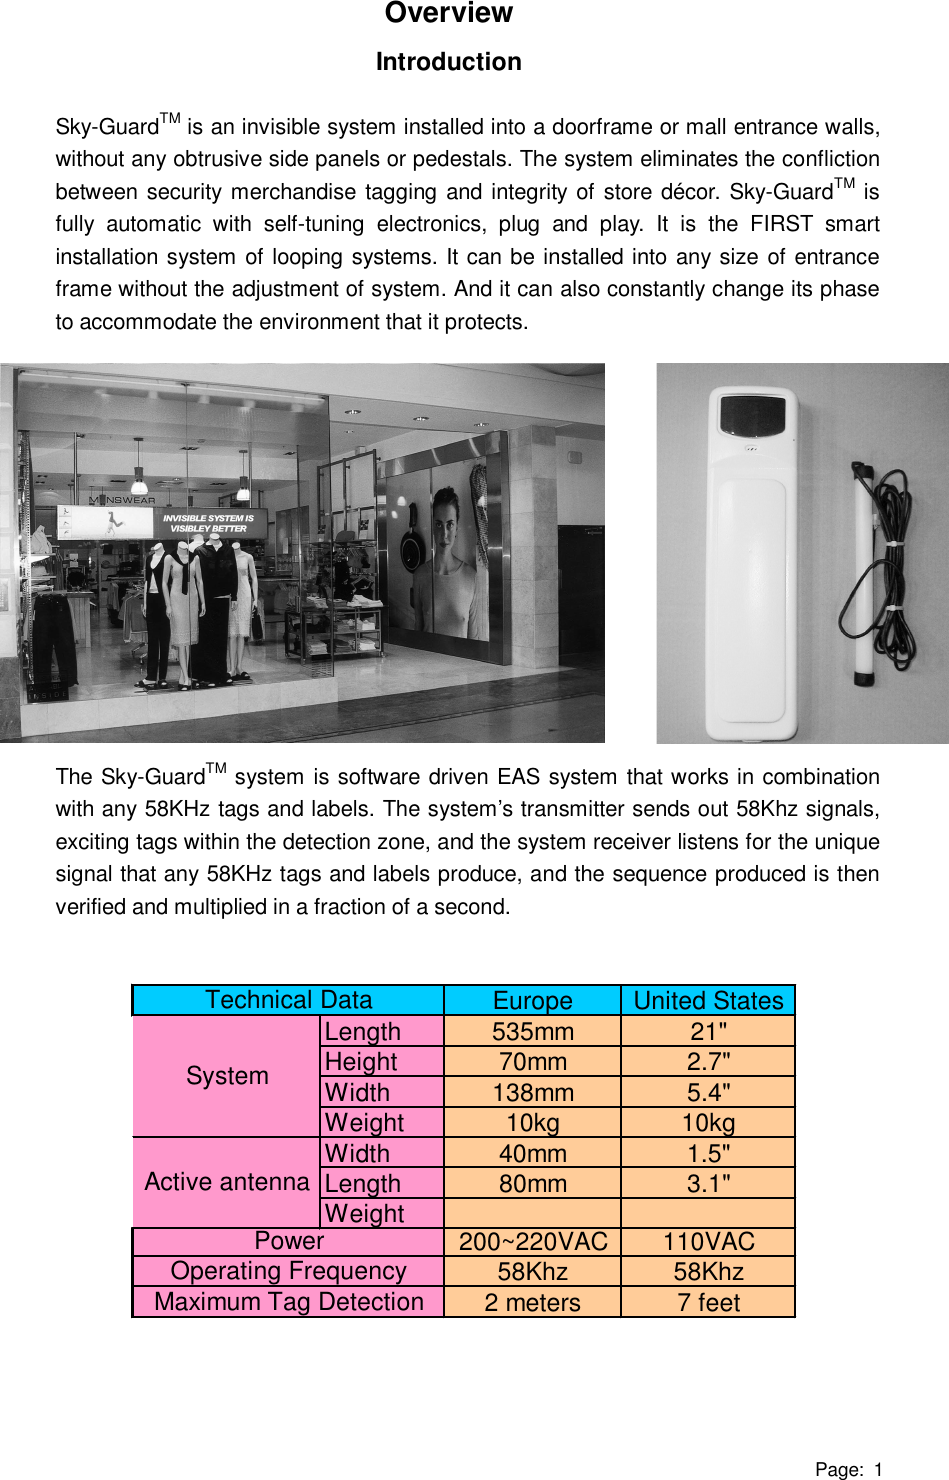 Page: 1 Overview Introduction  Sky-GuardTM is an invisible system installed into a doorframe or mall entrance walls, without any obtrusive side panels or pedestals. The system eliminates the confliction between security merchandise tagging and integrity of store décor. Sky-GuardTM is fully automatic with self-tuning electronics, plug and play. It is the FIRST smart installation system of looping systems. It can be installed into any size of entrance frame without the adjustment of system. And it can also constantly change its phase to accommodate the environment that it protects.               The Sky-GuardTM system is software driven EAS system that works in combination with any 58KHz tags and labels. The system’s transmitter sends out 58Khz signals, exciting tags within the detection zone, and the system receiver listens for the unique signal that any 58KHz tags and labels produce, and the sequence produced is then verified and multiplied in a fraction of a second.               Europe United StatesLength 535mm 21&quot;Height 70mm 2.7&quot;Width 138mm 5.4&quot;Weight 10kg 10kgWidth 40mm 1.5&quot;Length 80mm 3.1&quot;Weight 200~220VAC 110VAC58Khz 58Khz2 meters 7 feetSystemTechnical DataMaximum Tag DetectionActive antennaPowerOperating Frequency  